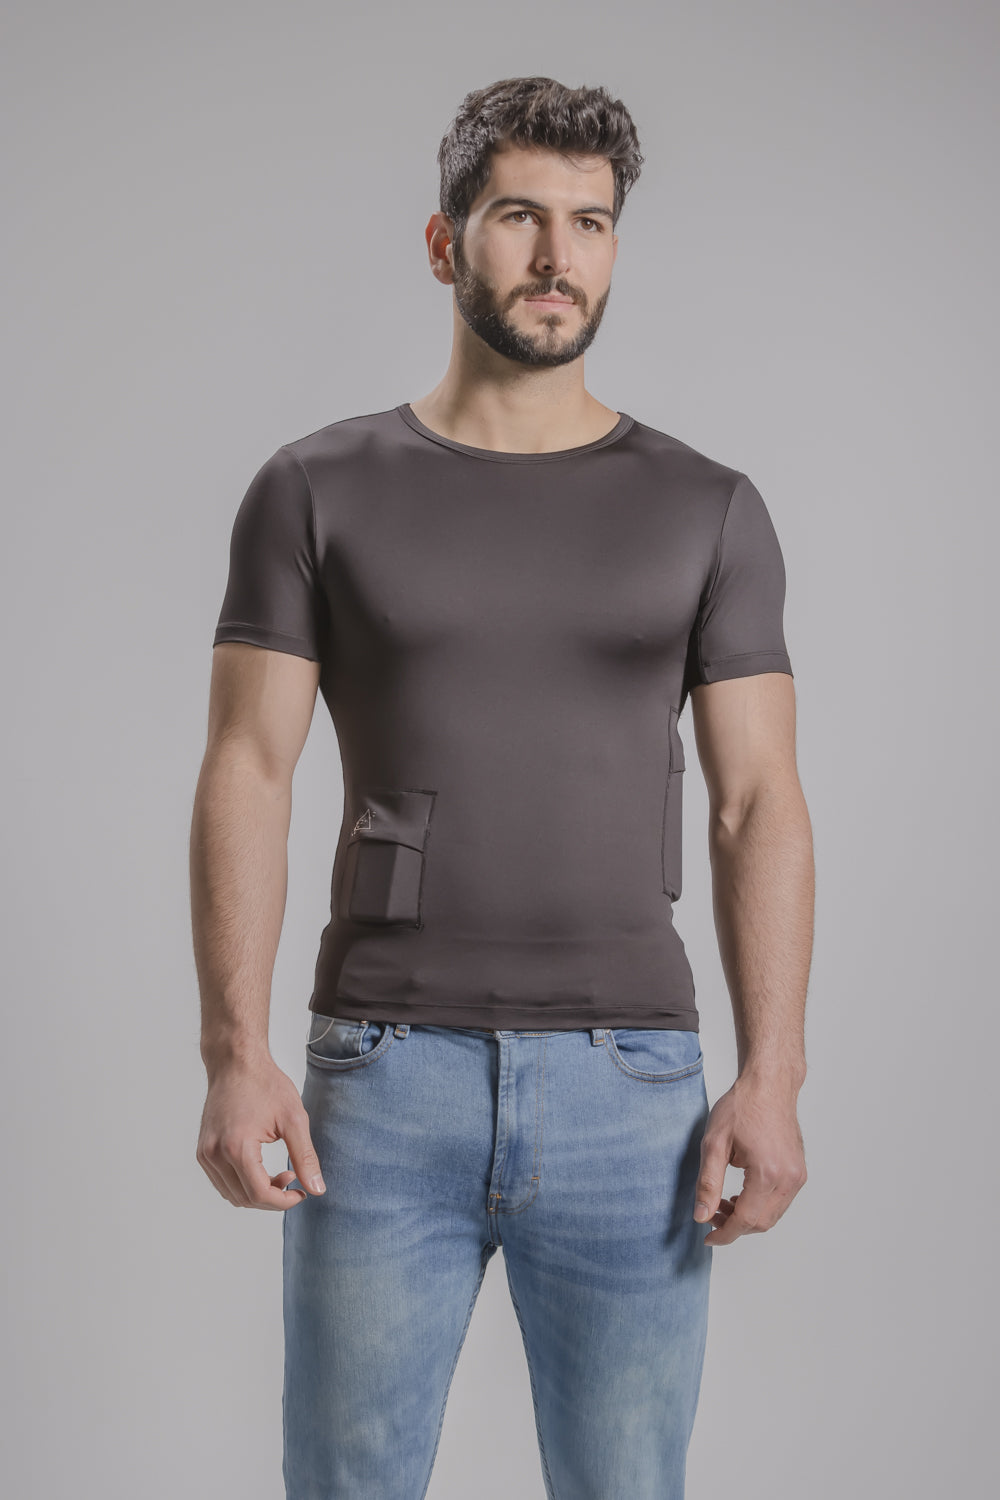 Men's Loungewear Crew Neck Tee with Insulin Pump and Cell Phone Pockets